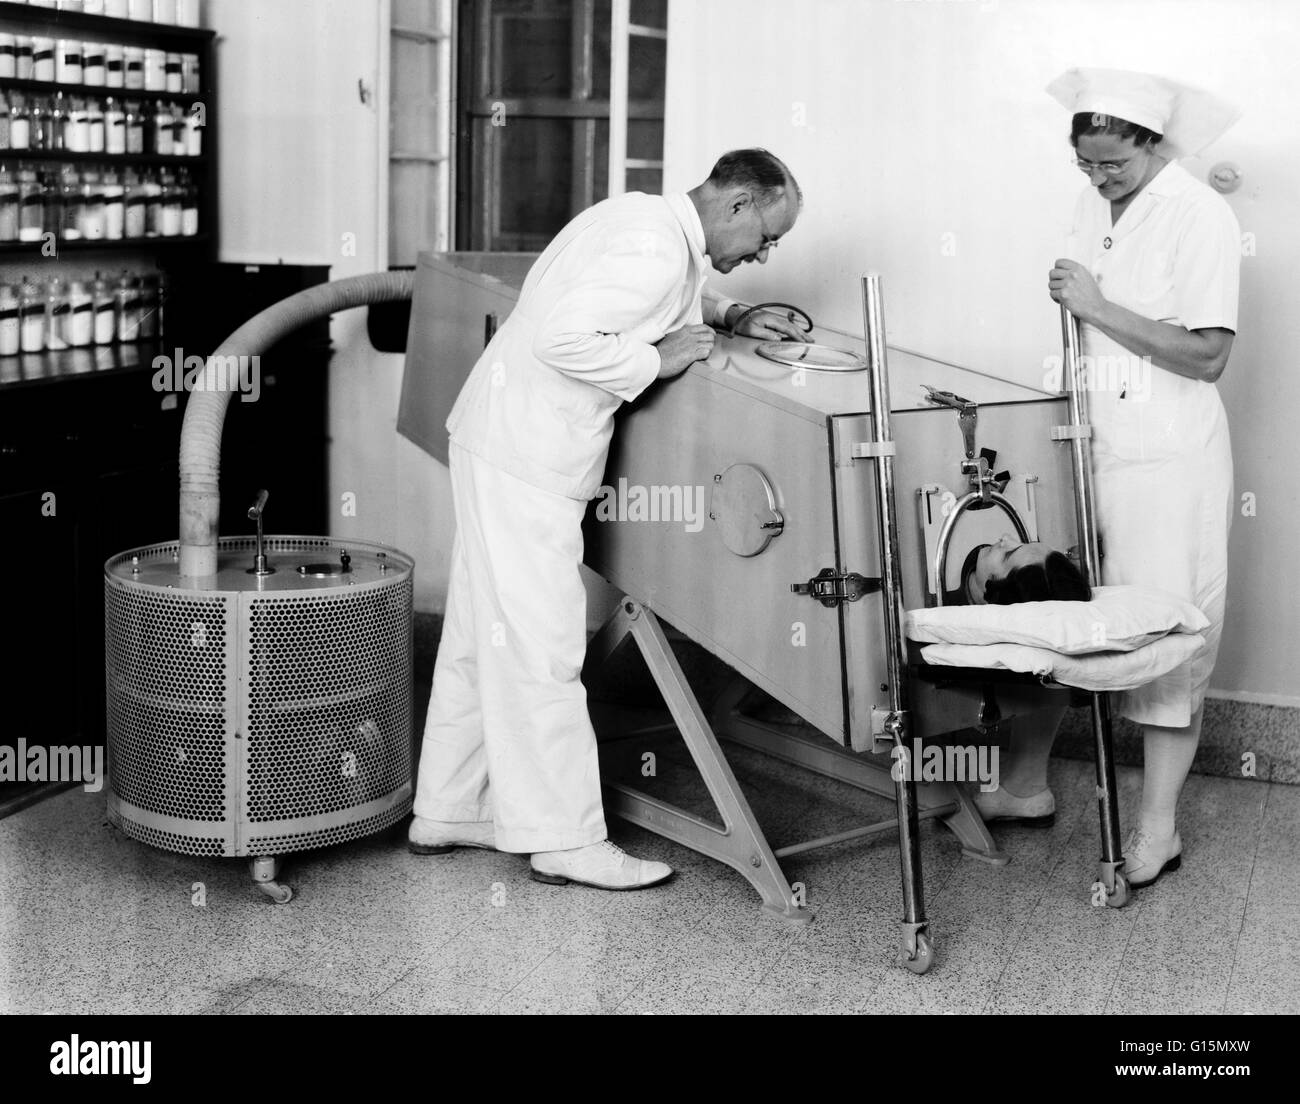 Scots Mission Hospital iron lung. Dr. Torrance, Sister Lee, patient Dow.  March, 1940. The first modern and practical respirator nicknamed the "iron  lung" was invented by Harvard medical researchers Philip Drinker and